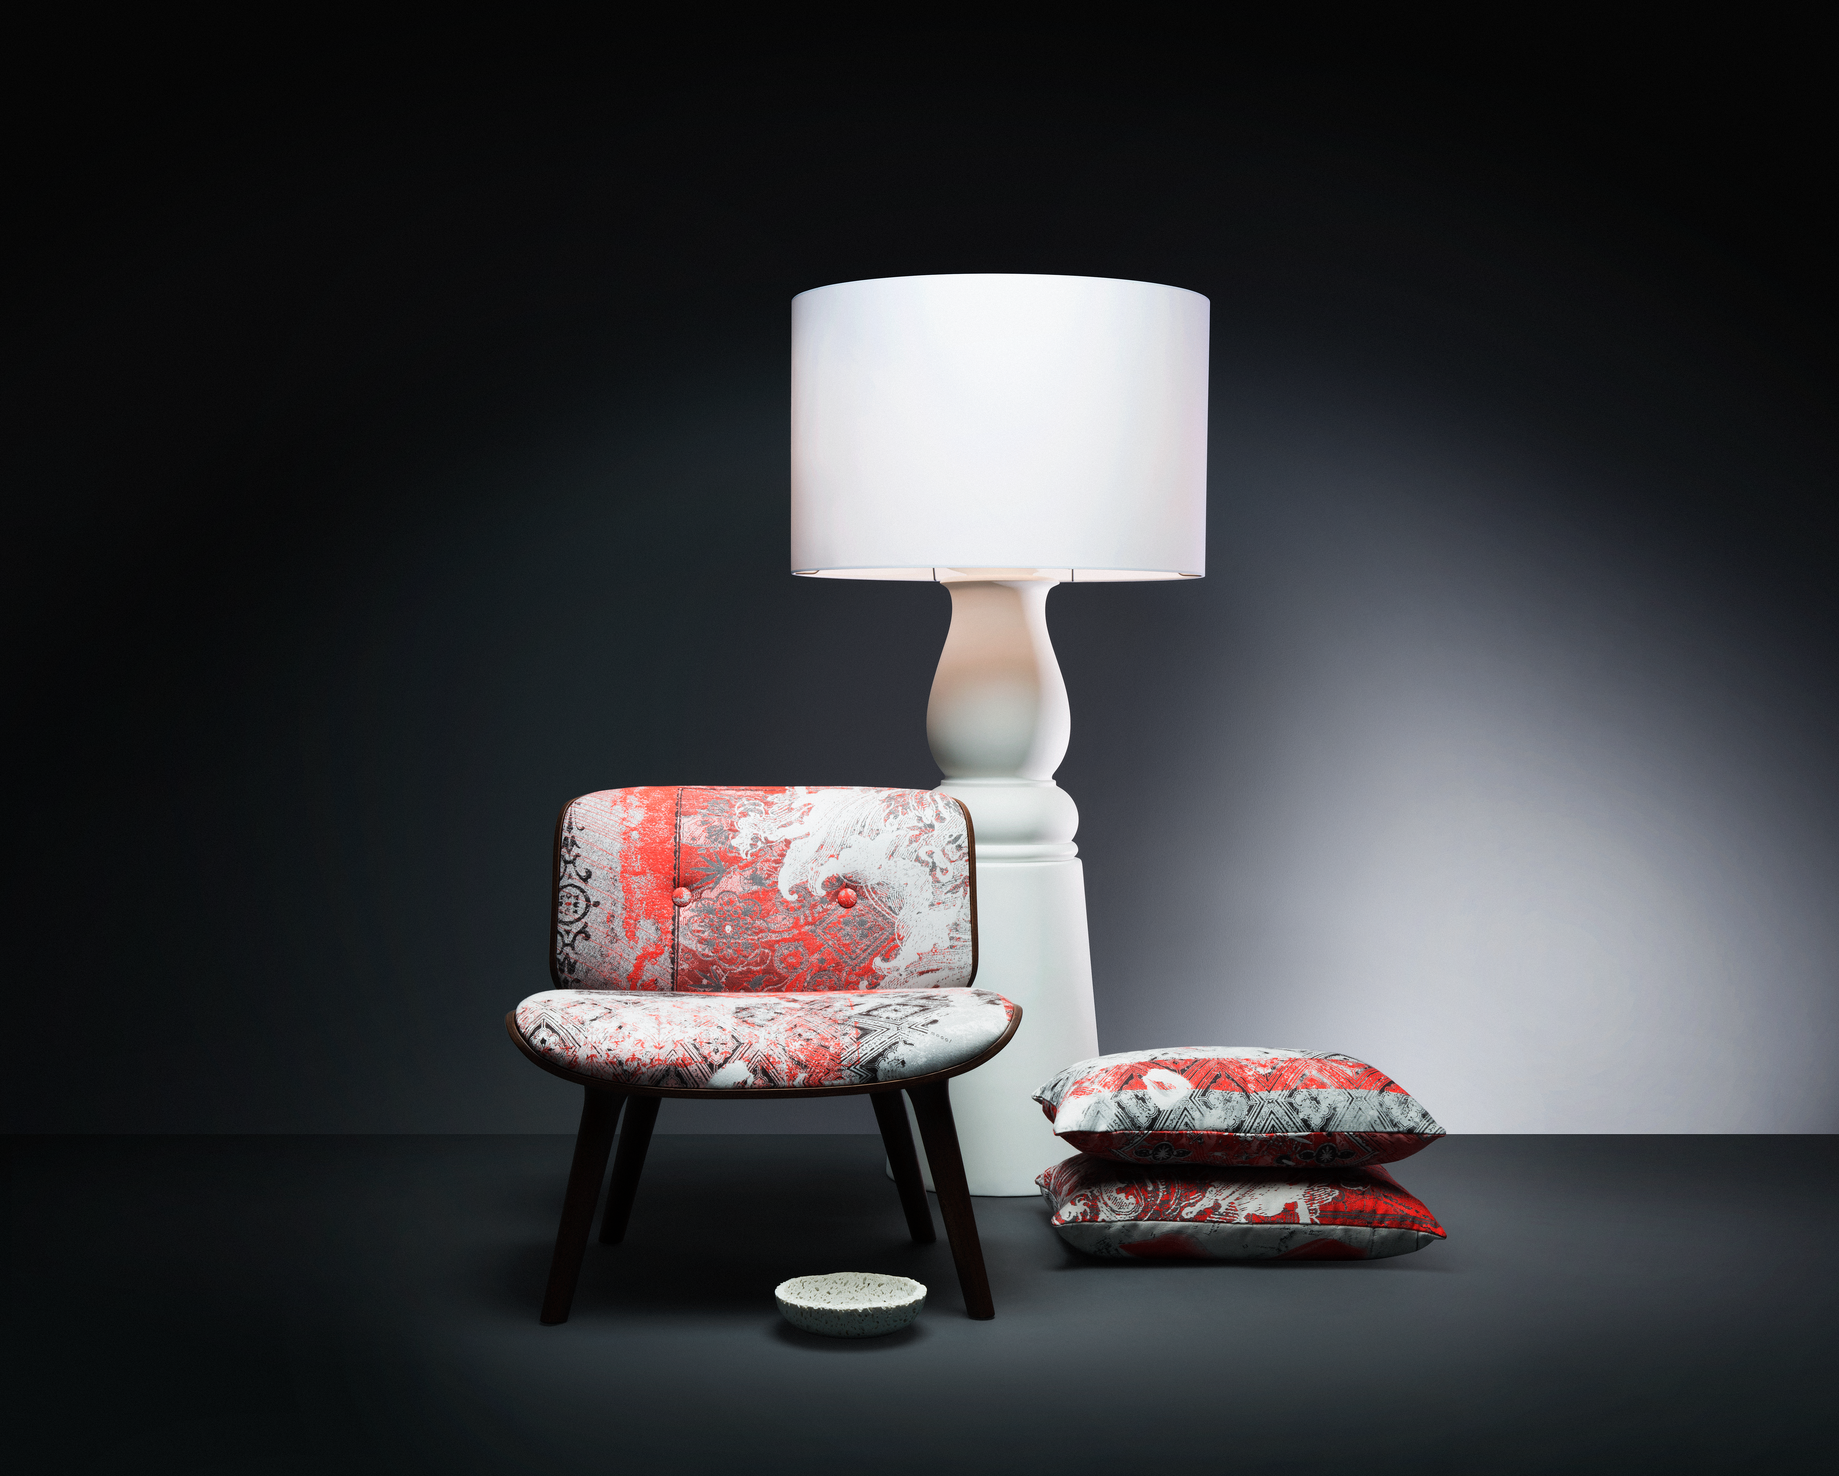 Poetic composition Nut Chair, Farooo floor lamp white and pillows